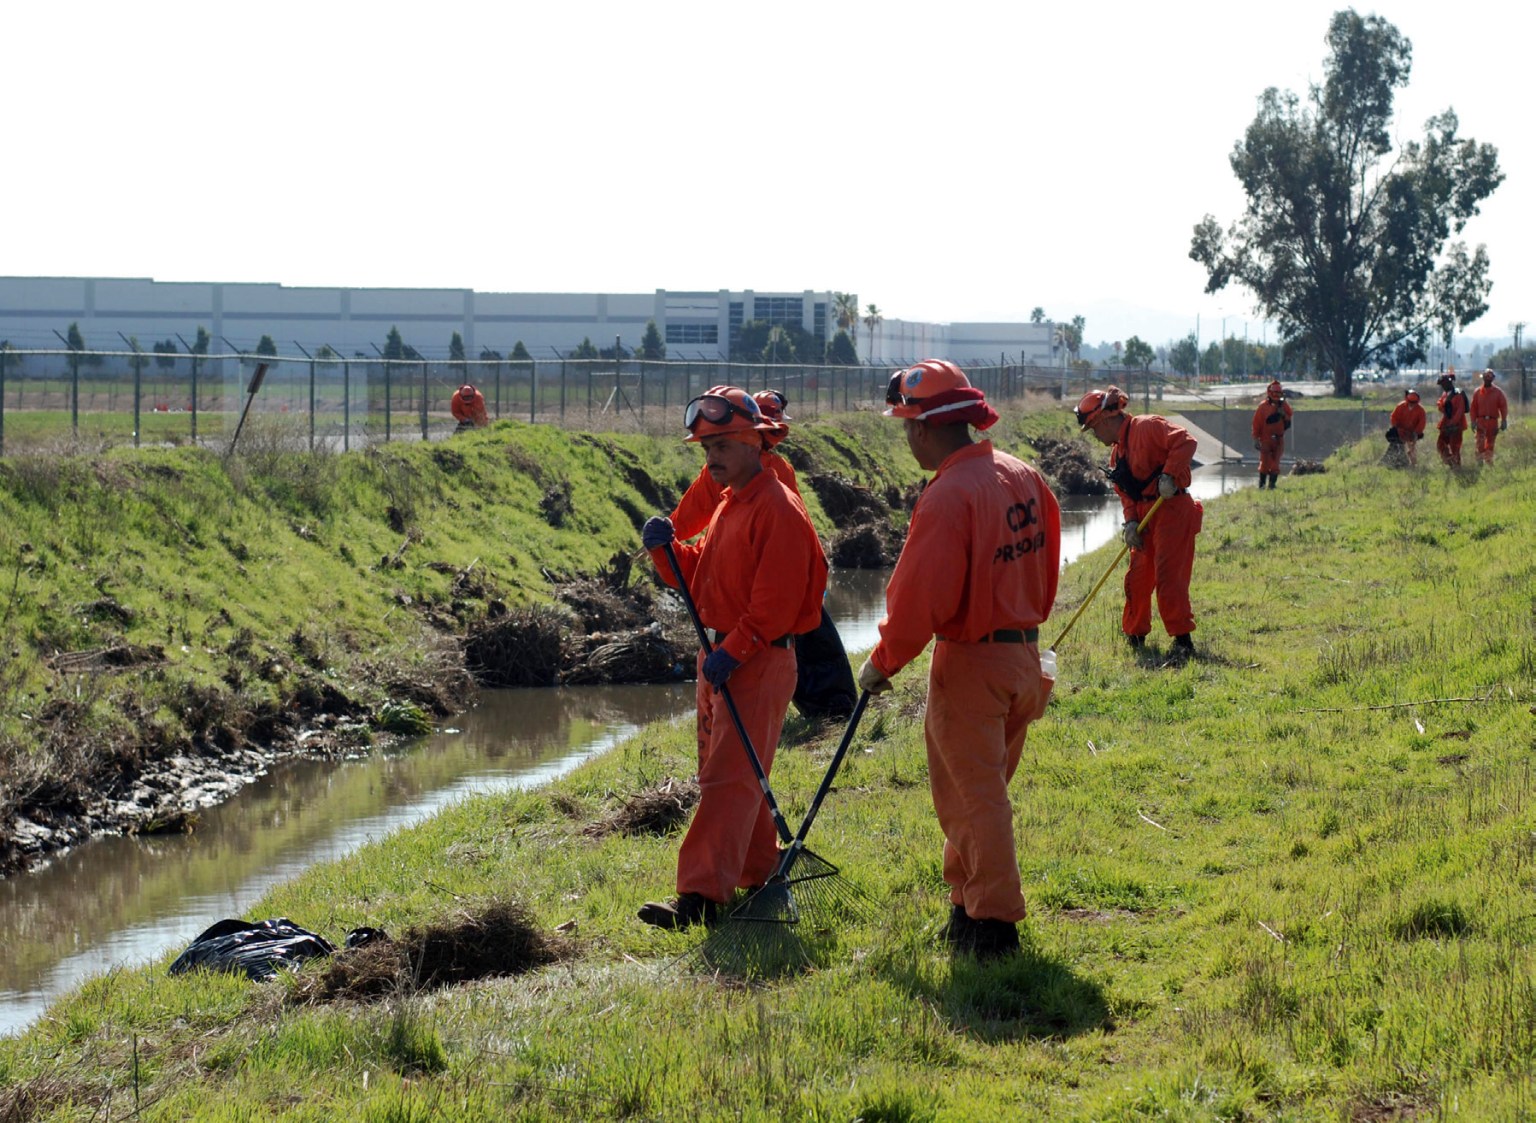 Men in orange prison jumpsuits and hats work along the grassy bank of a small muddy stream.